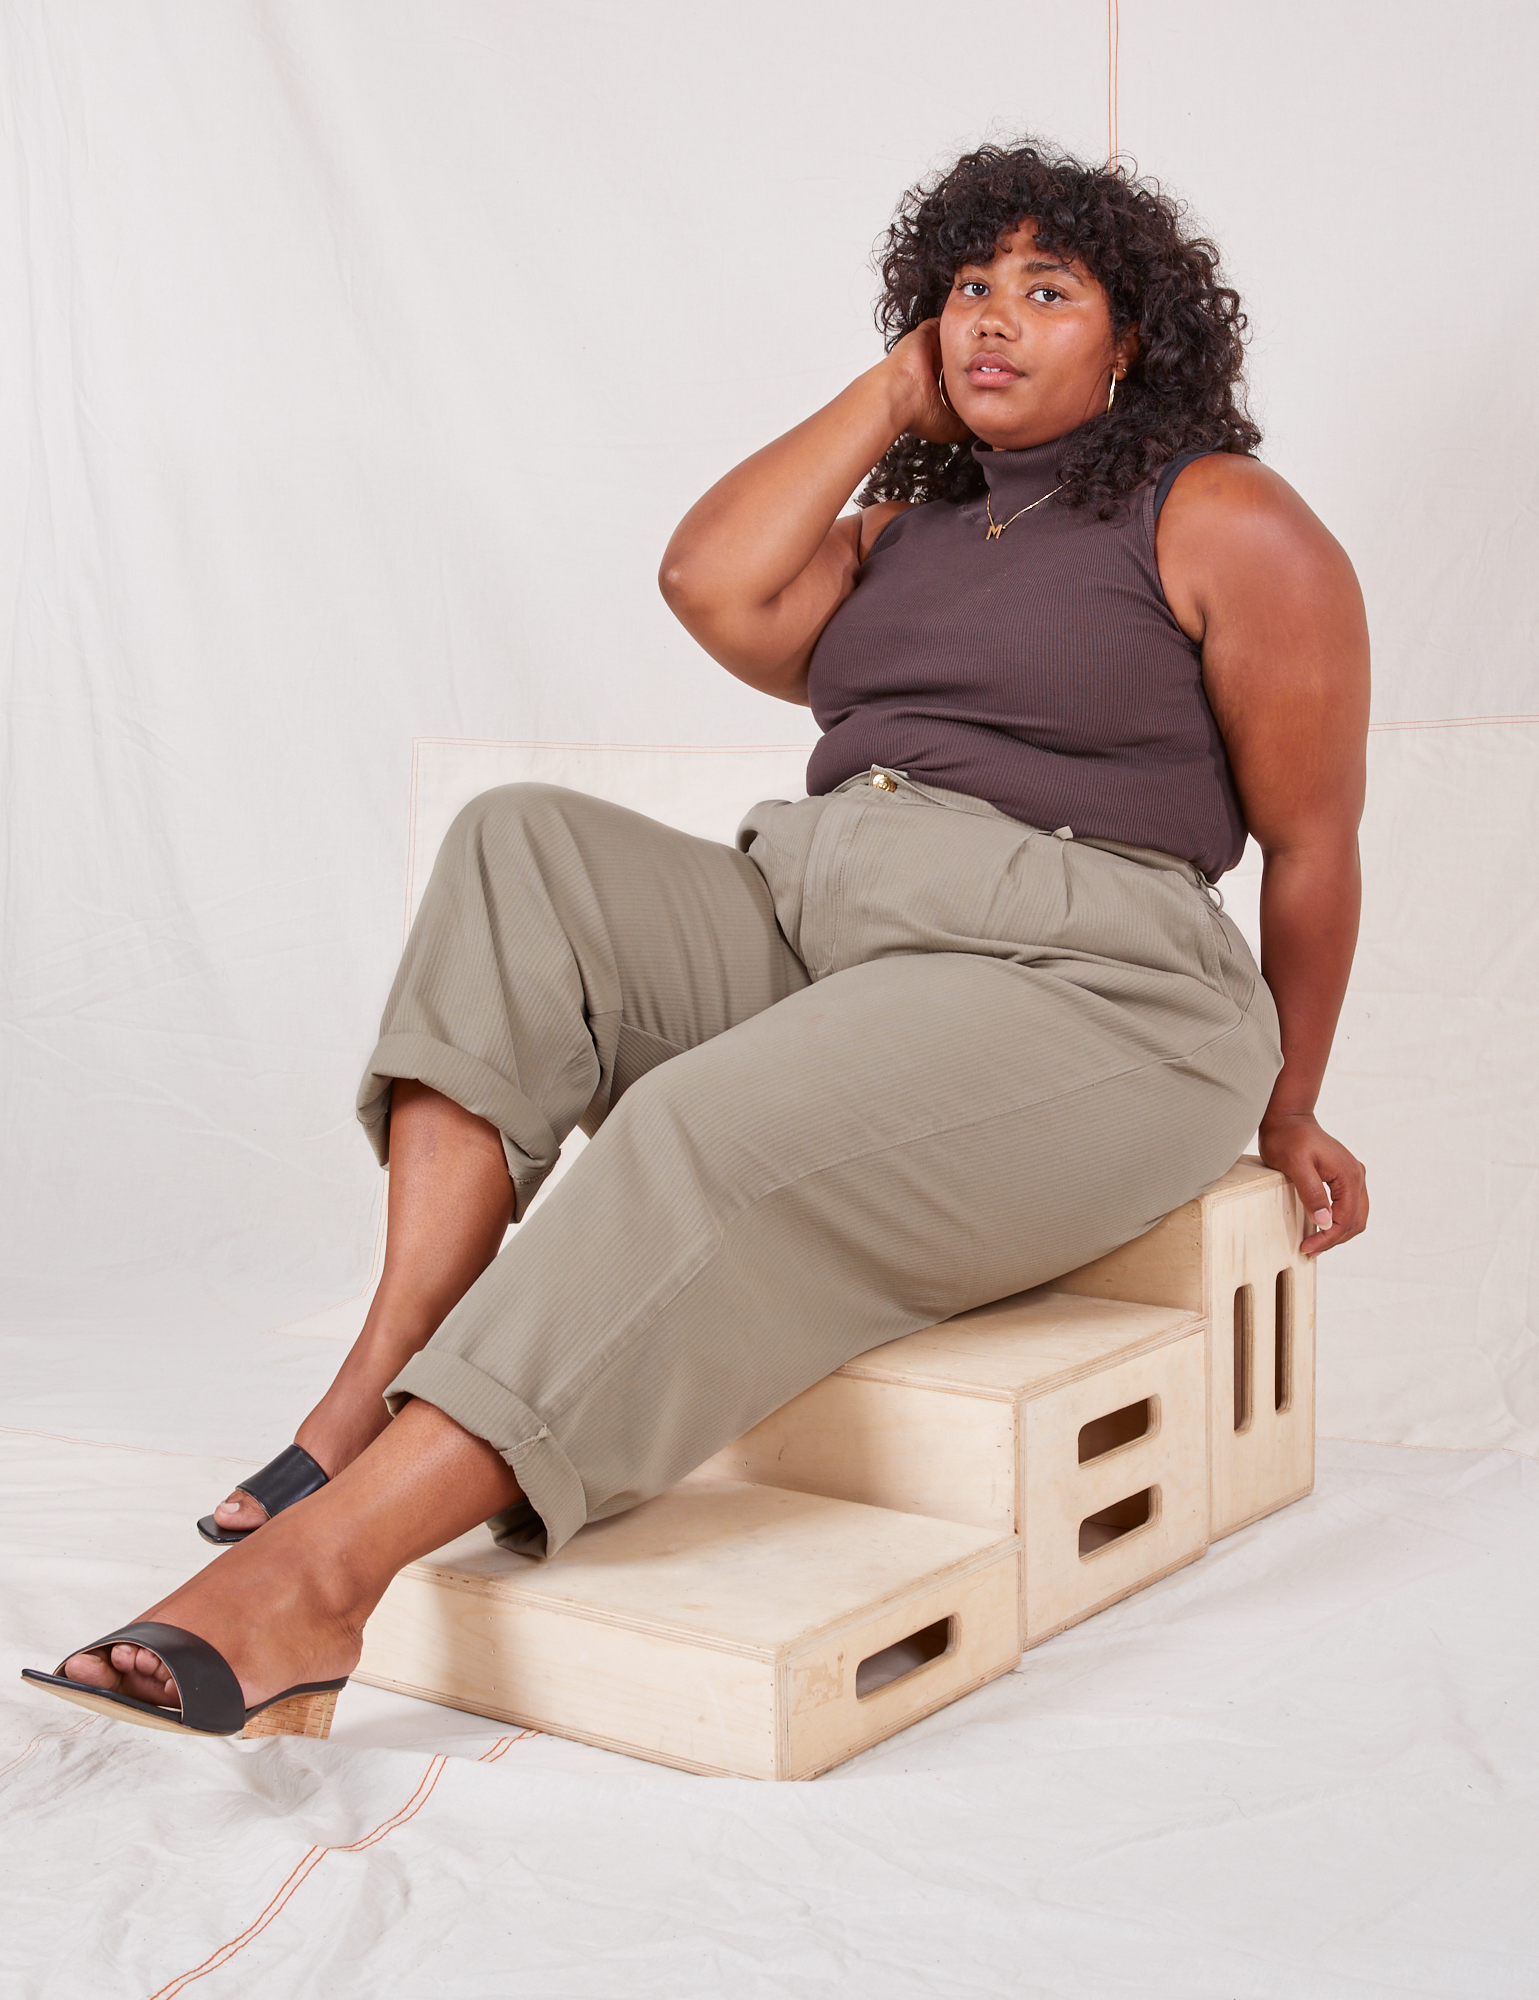 Heritage Trousers in Khaki Grey on Morgan sitting on wooden crates wearing espresso brown Sleeveless Essential Turtleneck